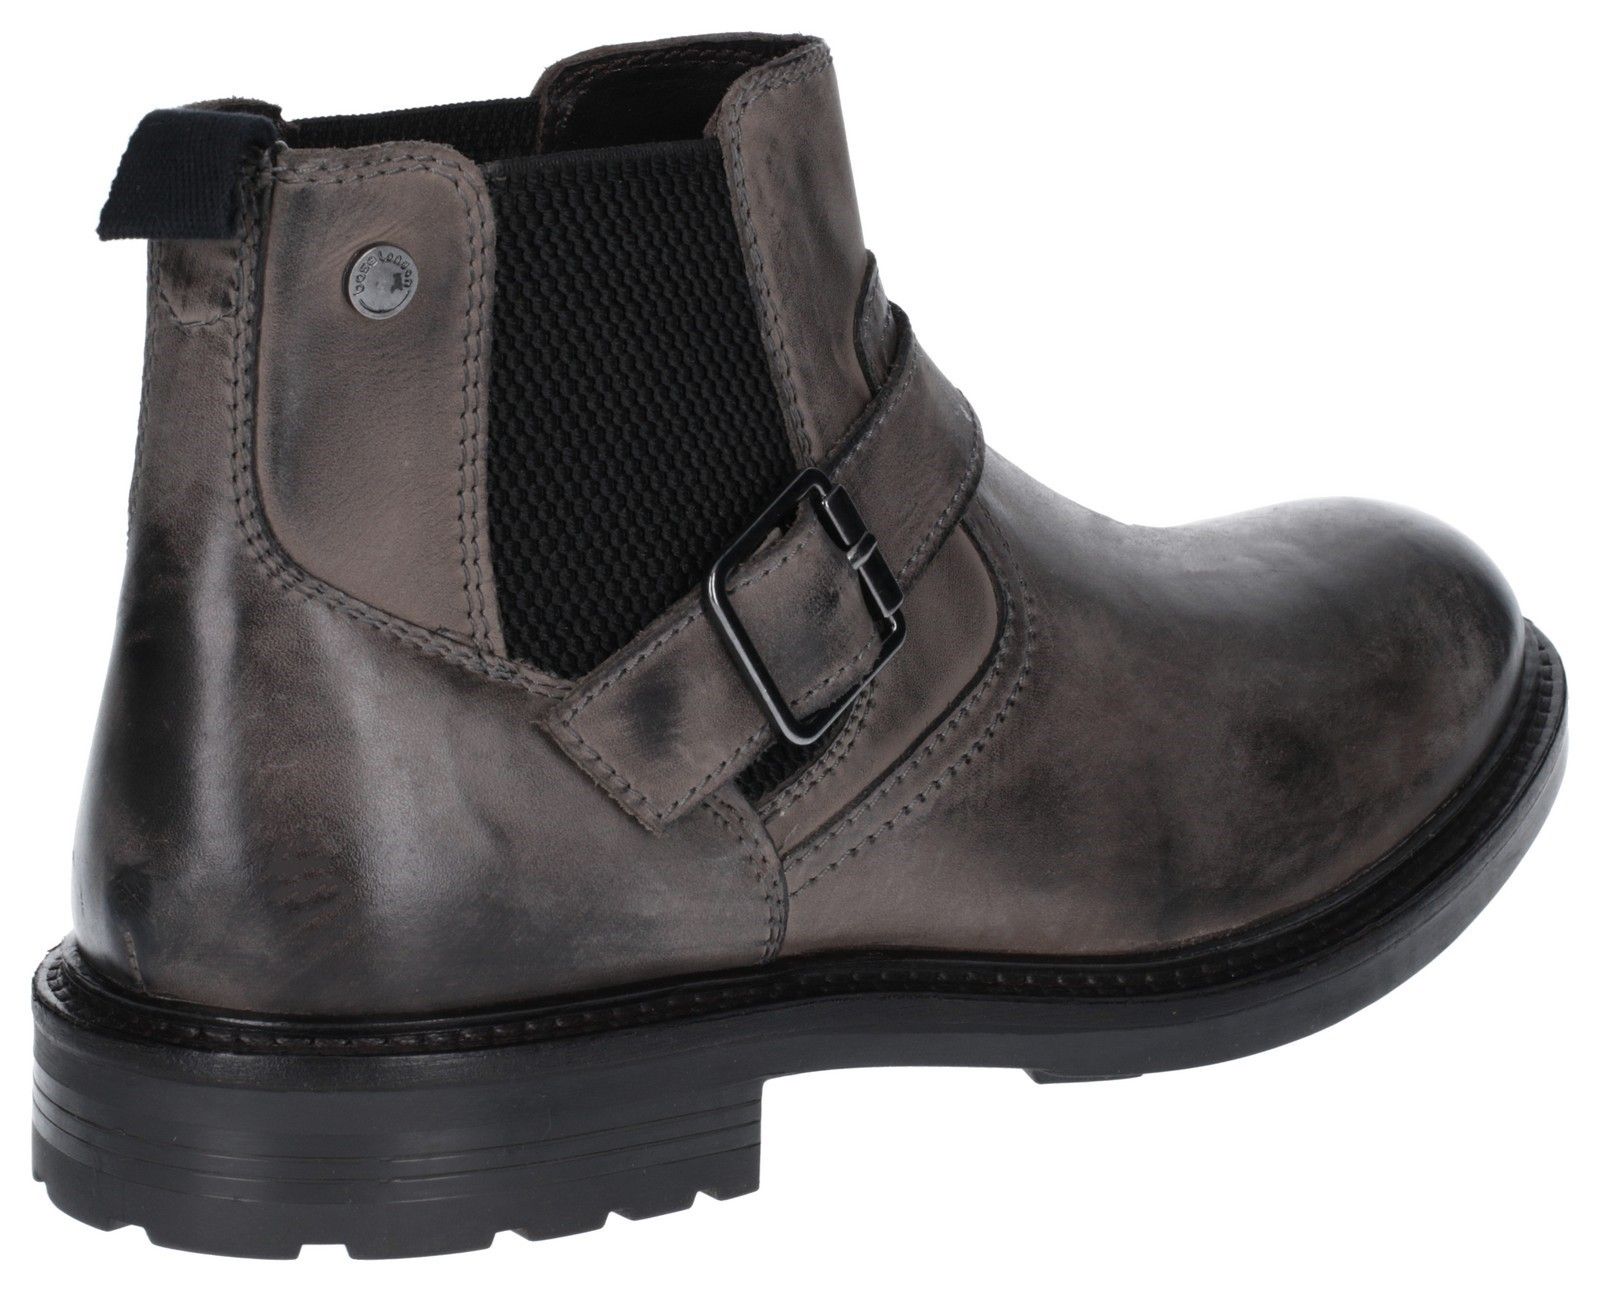 Base London have added a twist to this rugged mens chelsea boot. Featuring a buckle strap across the front, this fine blend of styles sits on a durable and chunky winter sole and provides an elasticated gusset and pull tab for ease of use. Smart/Casual Styling. 
Buckle Strap Details. 
Chunky Sole.